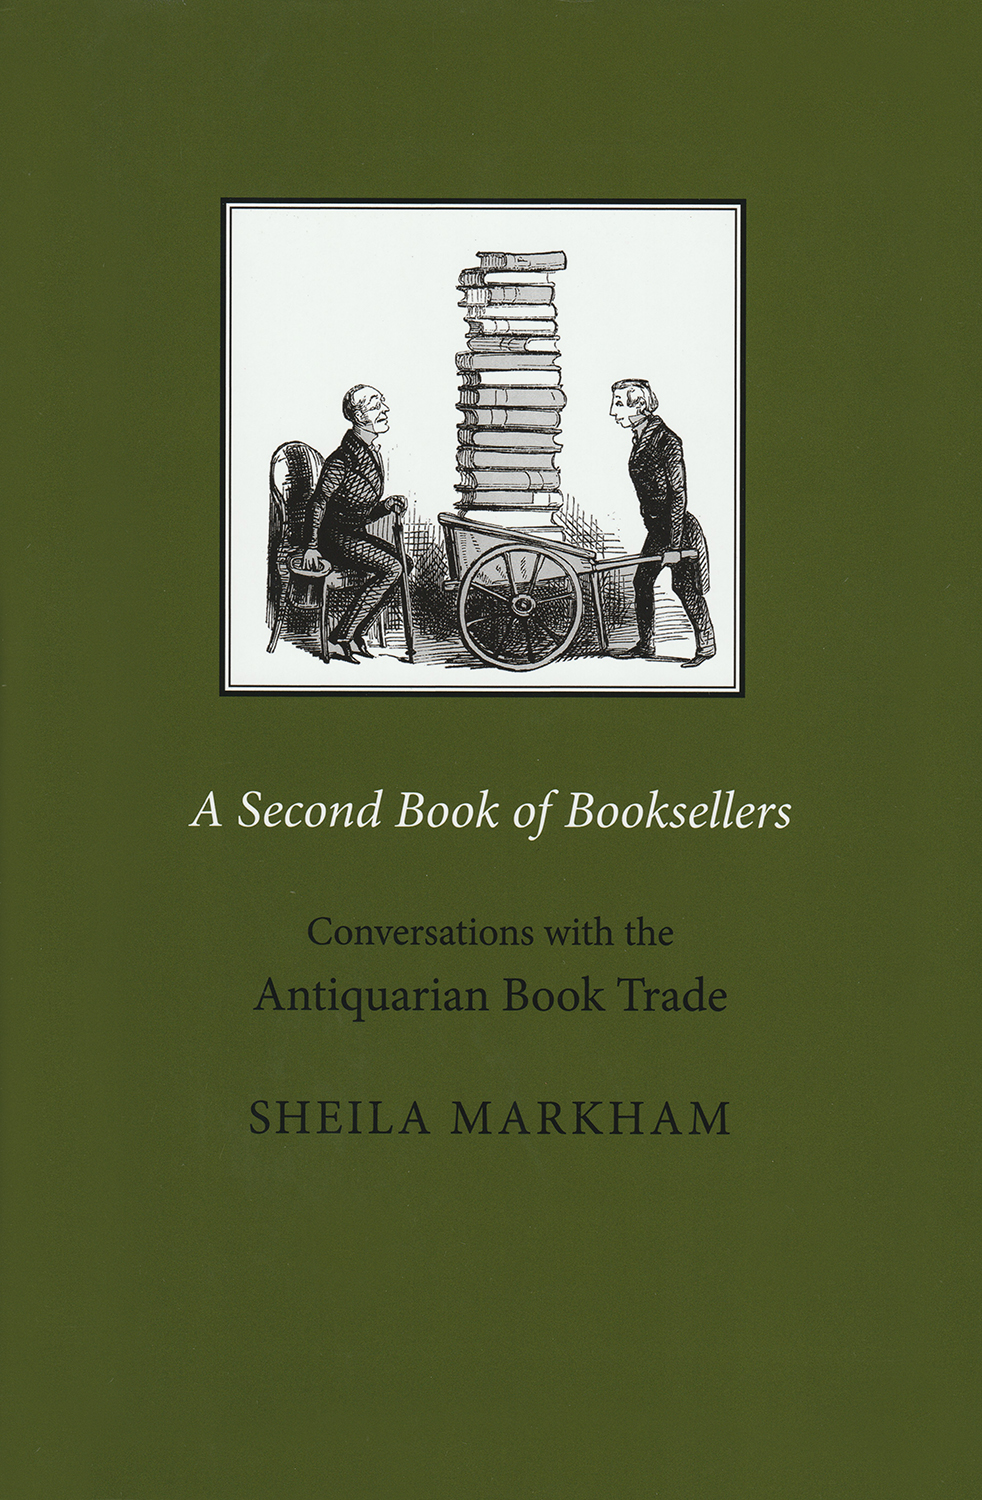 A Second Book of Booksellers